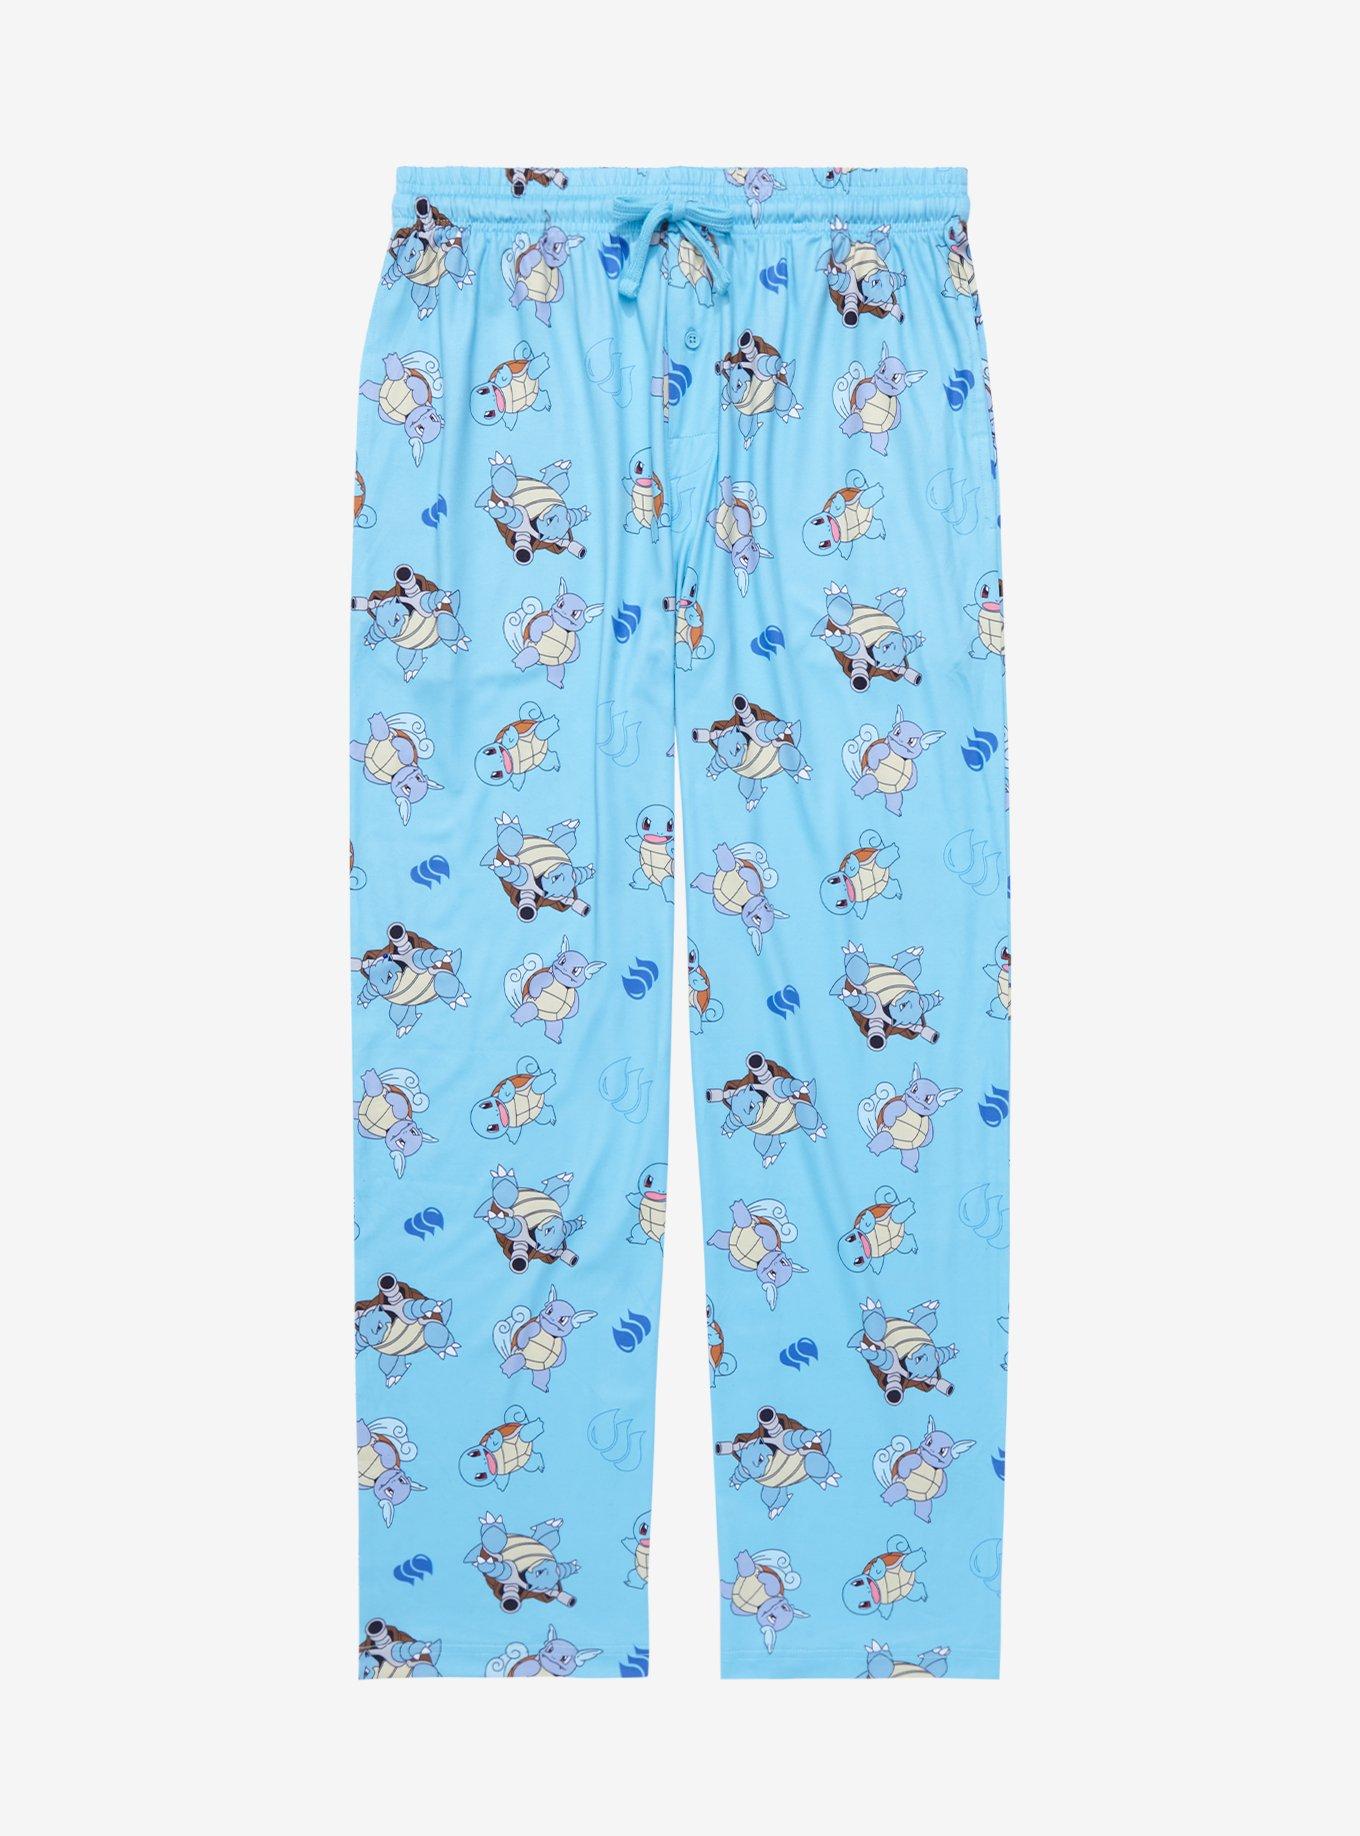 Pokémon Squirtle Evolutions Allover Print Sleep Pants - BoxLunch Exclusive